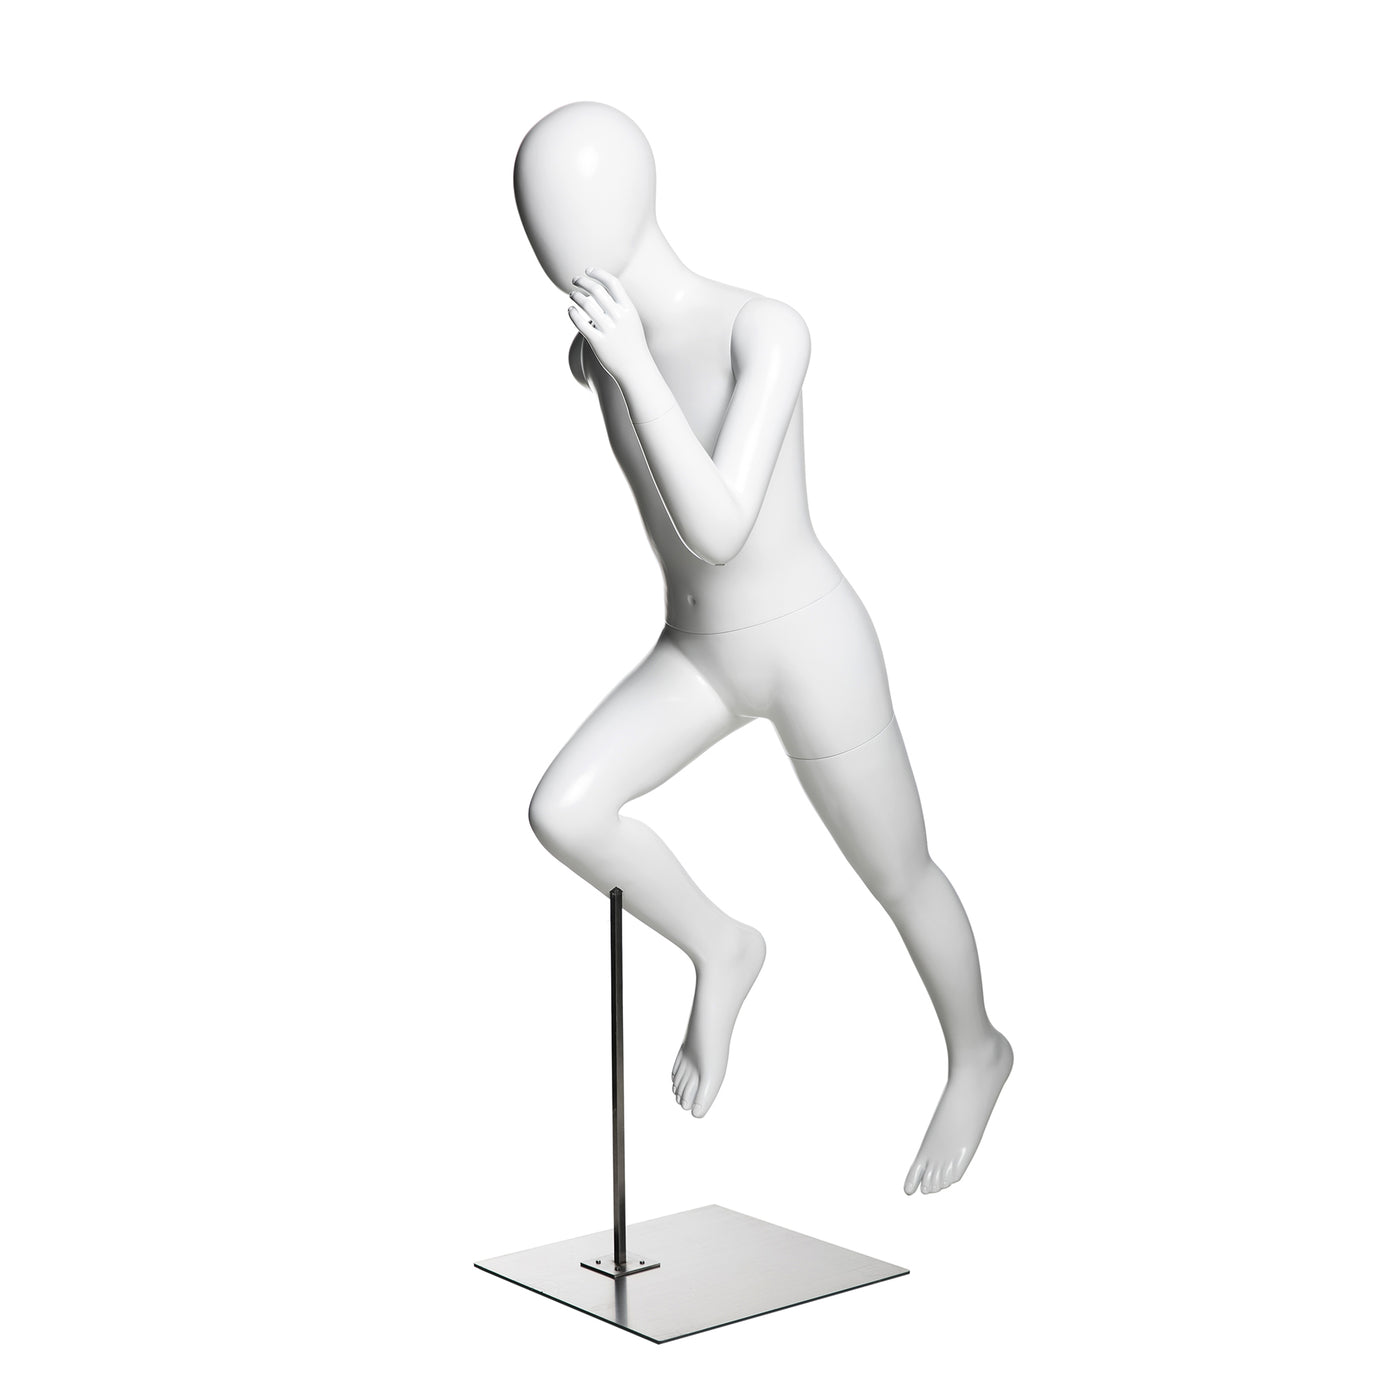 Walking or Hiking Pose Male Mannequin - Gloss White - Red 3 Display